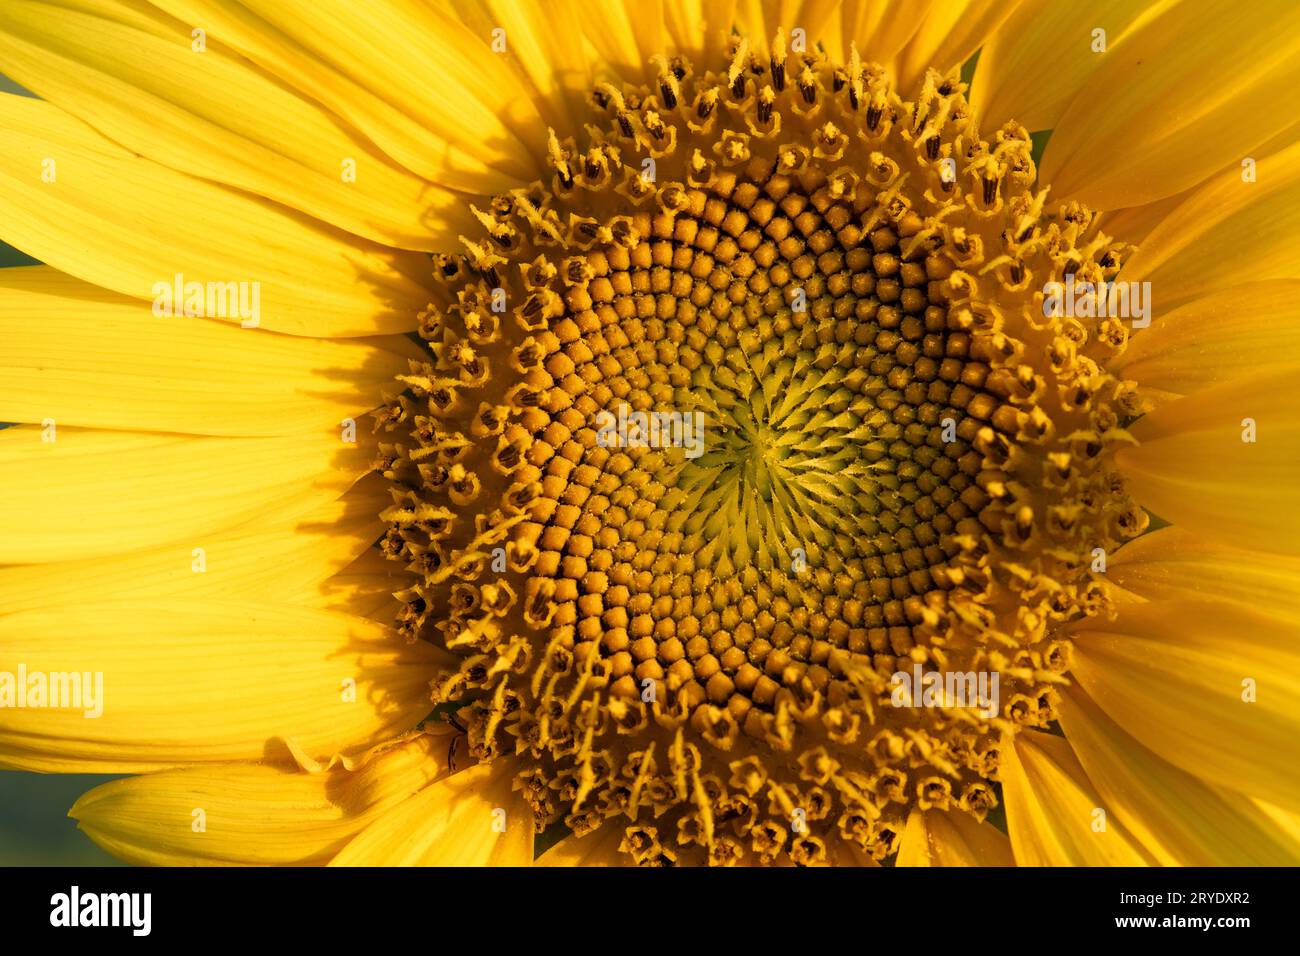 Macro close-up image of the interior of a yellow sunflower in summer; seeds Stock Photo